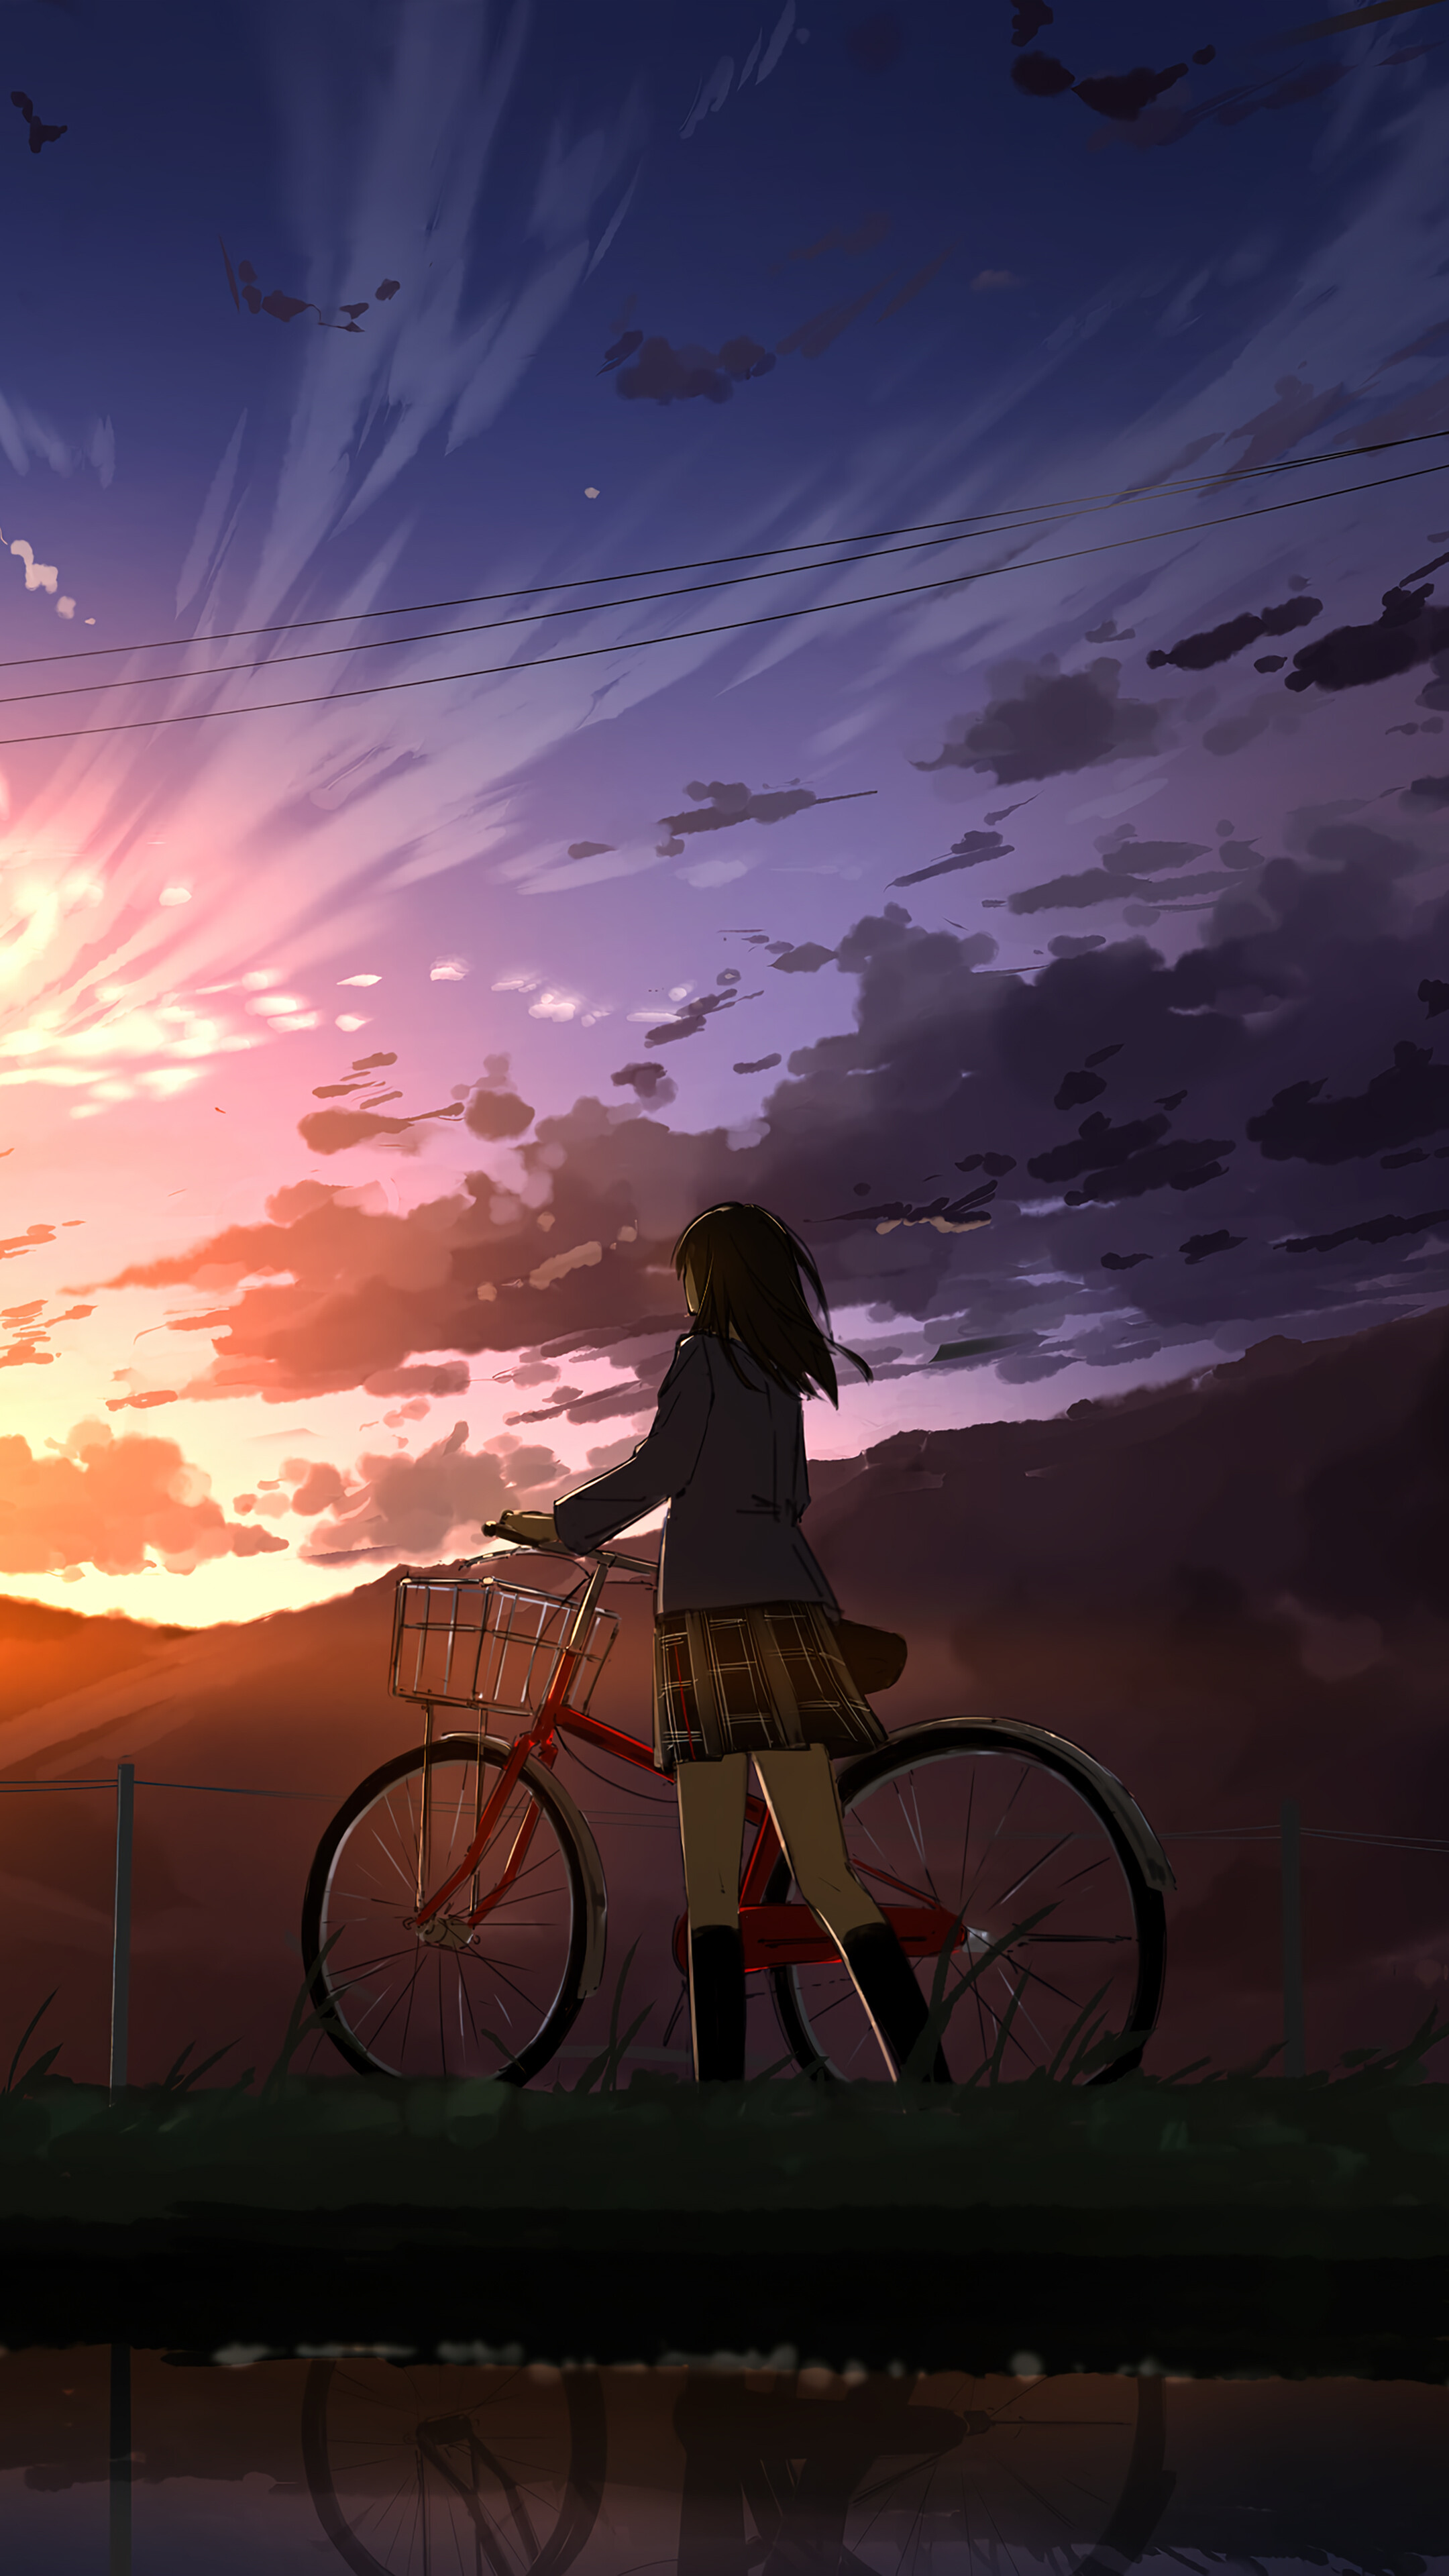 Mobile wallpaper Anime Sunset Sky Cloud Original 885742 download the  picture for free